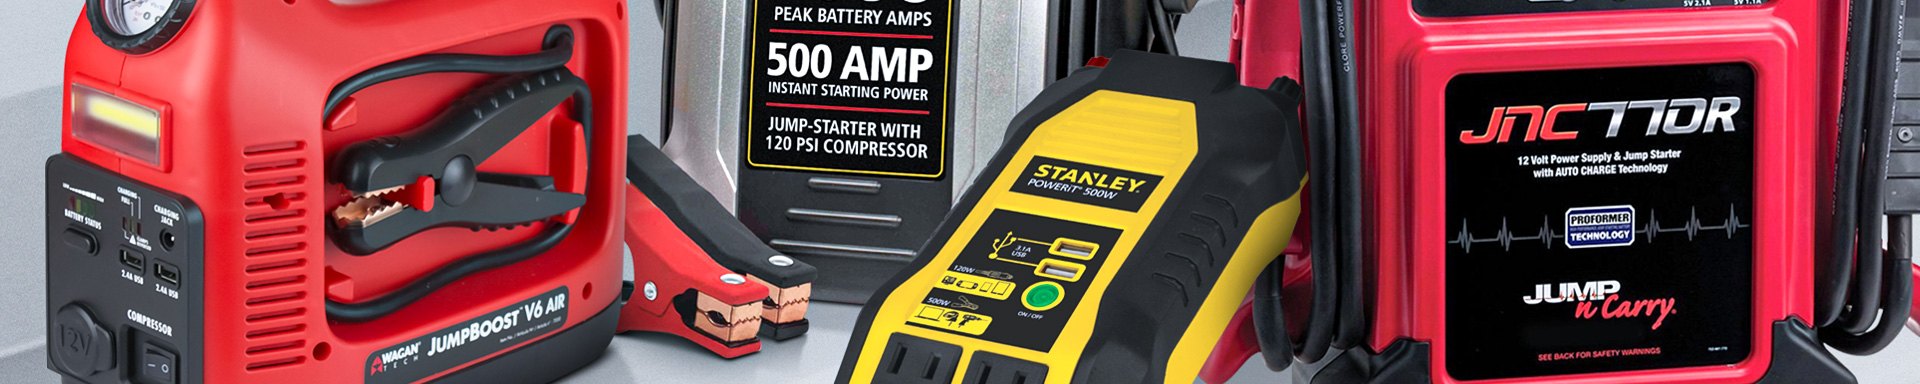 FJC Battery Chargers & Jump Starters